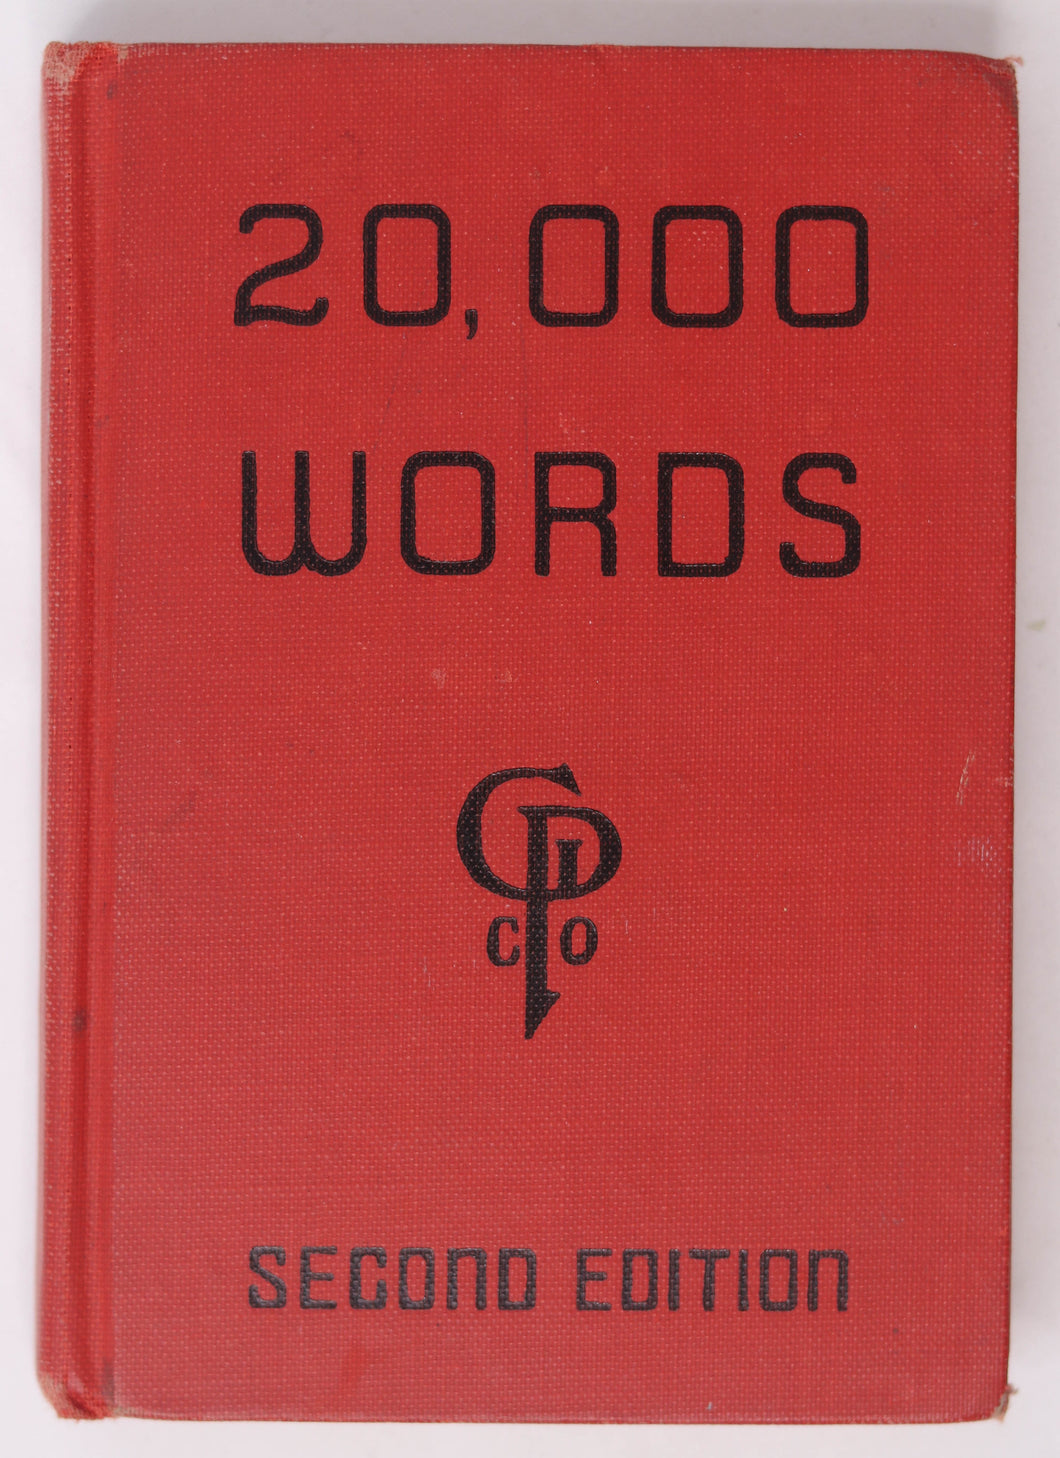 Book Non-Fiction Stenography - 20,000 Words - Spelled, Divided, And Accented - The Gregg Publishing Co. - Copyright 1934 & 1942 - Compiled by:  Louis A. Leslie C.S.R. - 2nd Edition, Revised - VINTAGE, Used - RARE